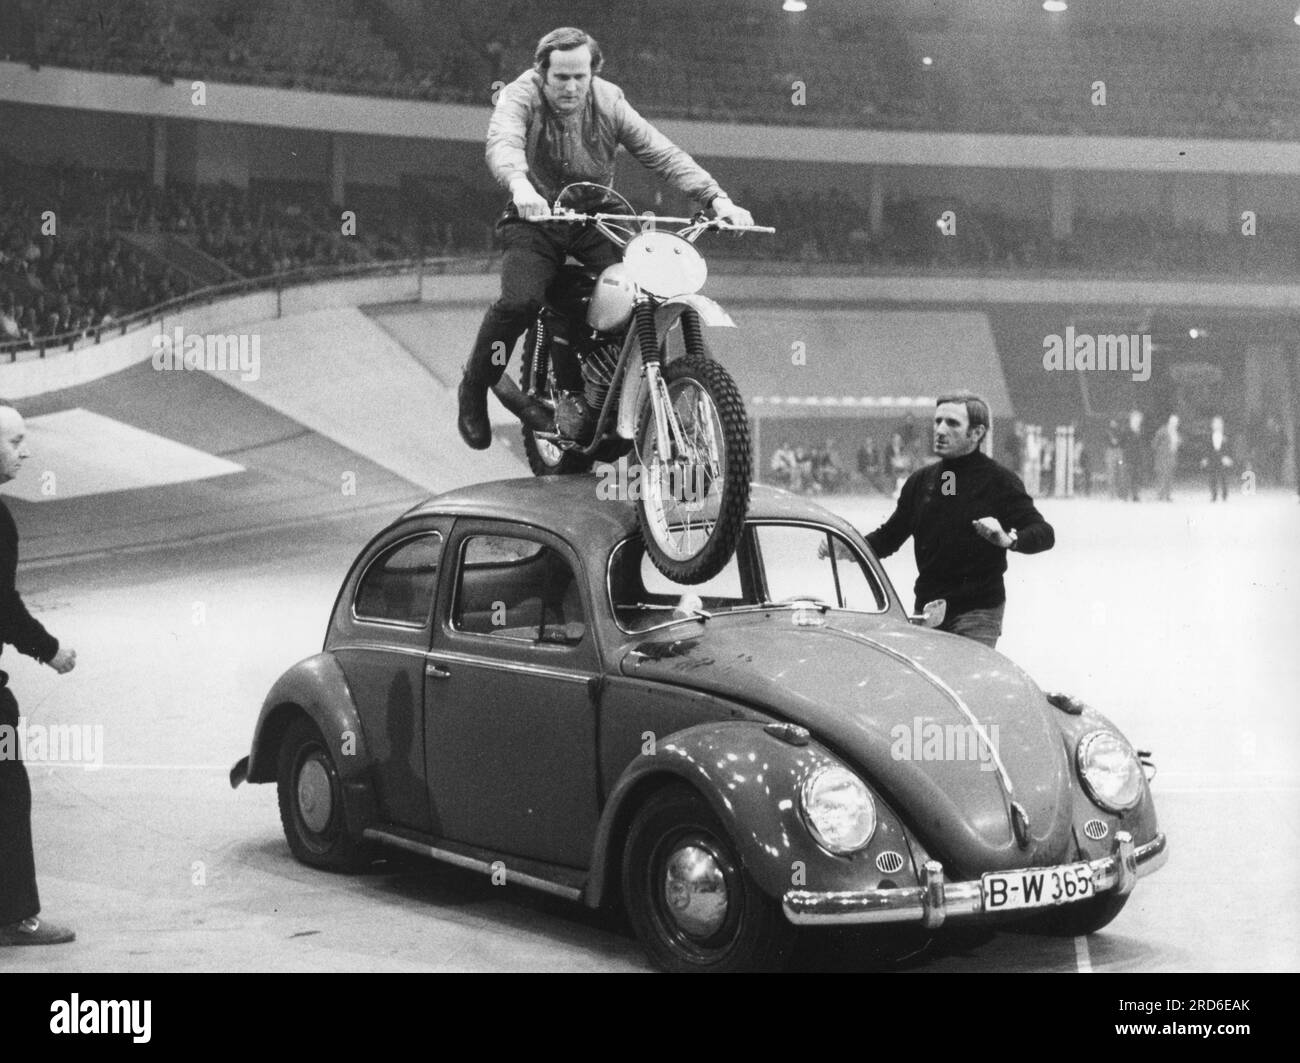 Witthoeft, Rolf, * 1944, German Enduro rider and businessman, rides across a VW beetle, ADDITIONAL-RIGHTS-CLEARANCE-INFO-NOT-AVAILABLE Stock Photo